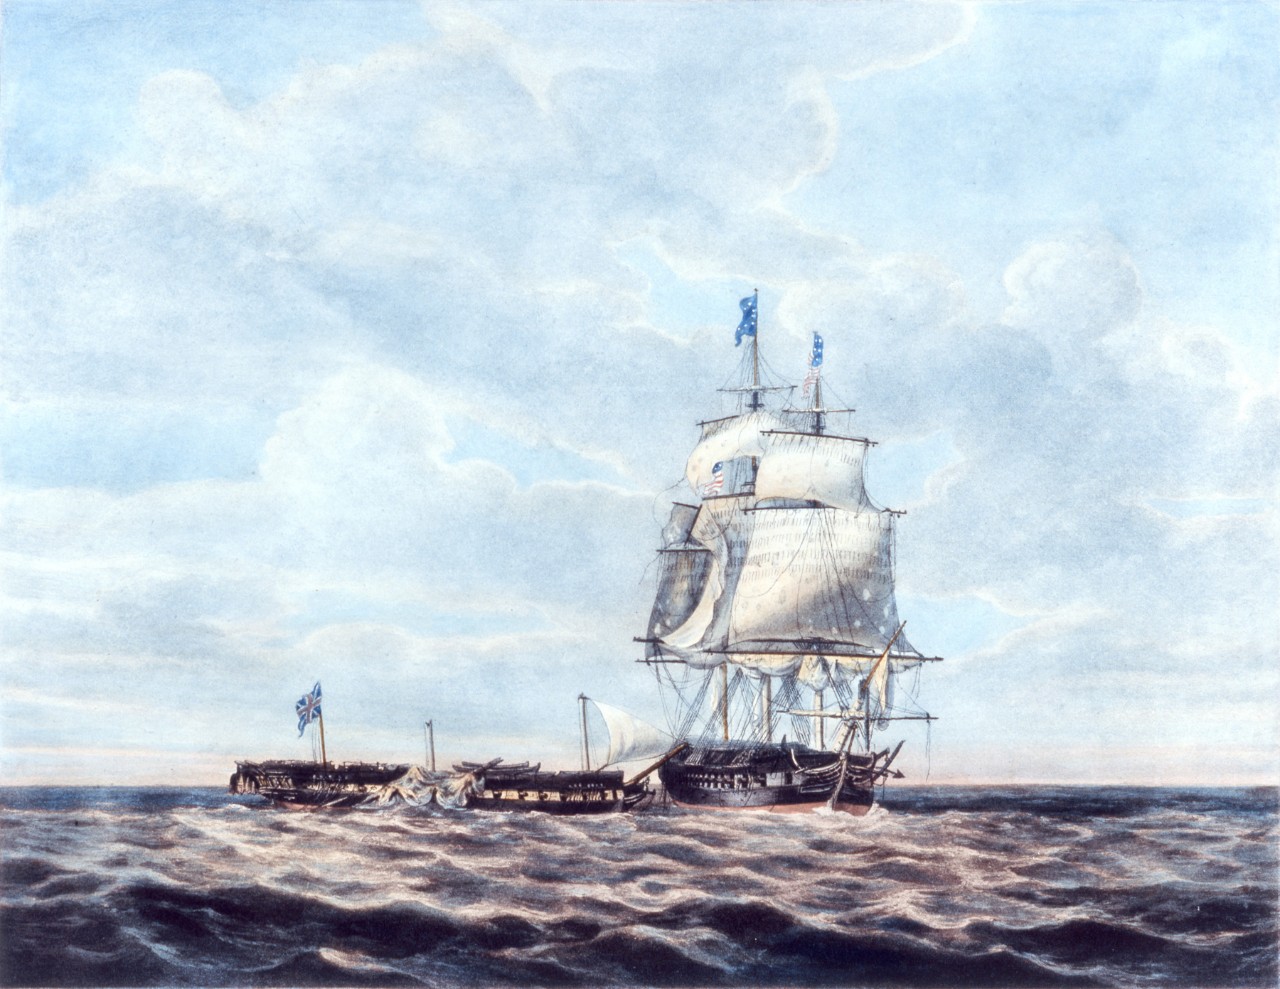 A ship on the left side of the image has lost the masts and sails, another sailing ship is on the right.